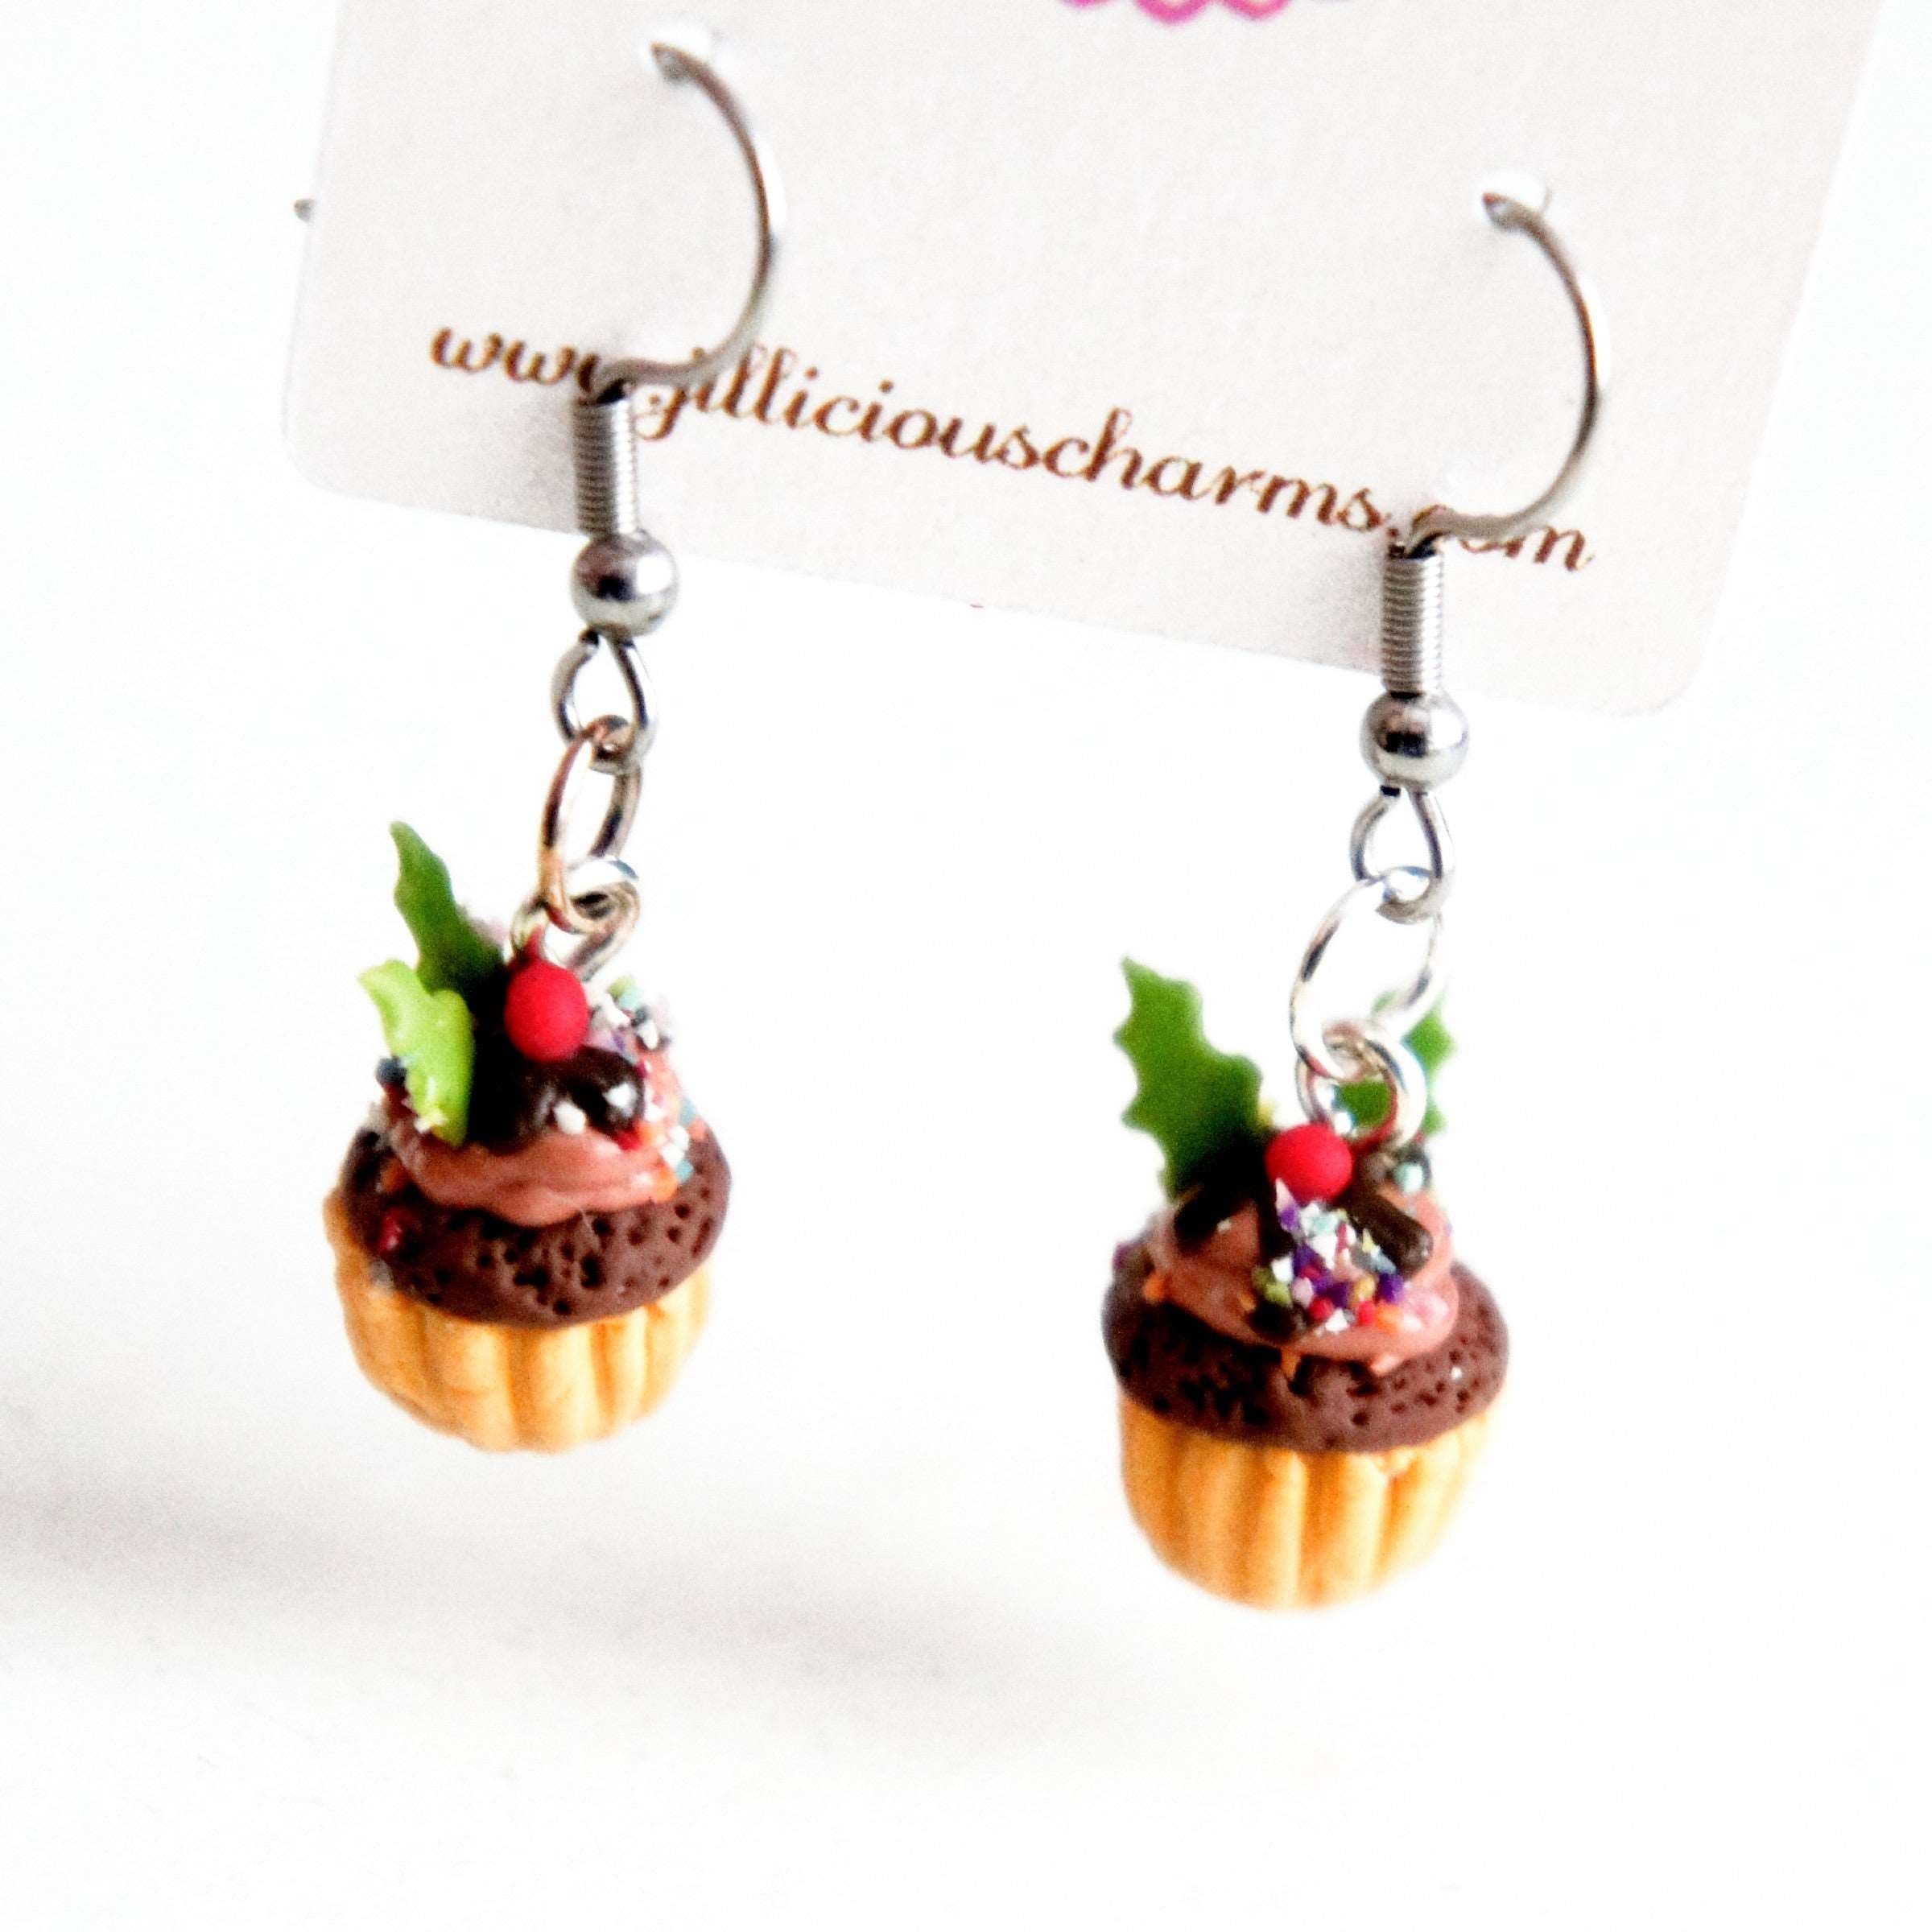 Christmas Cupcake Dangle Earrings - Jillicious charms and accessories